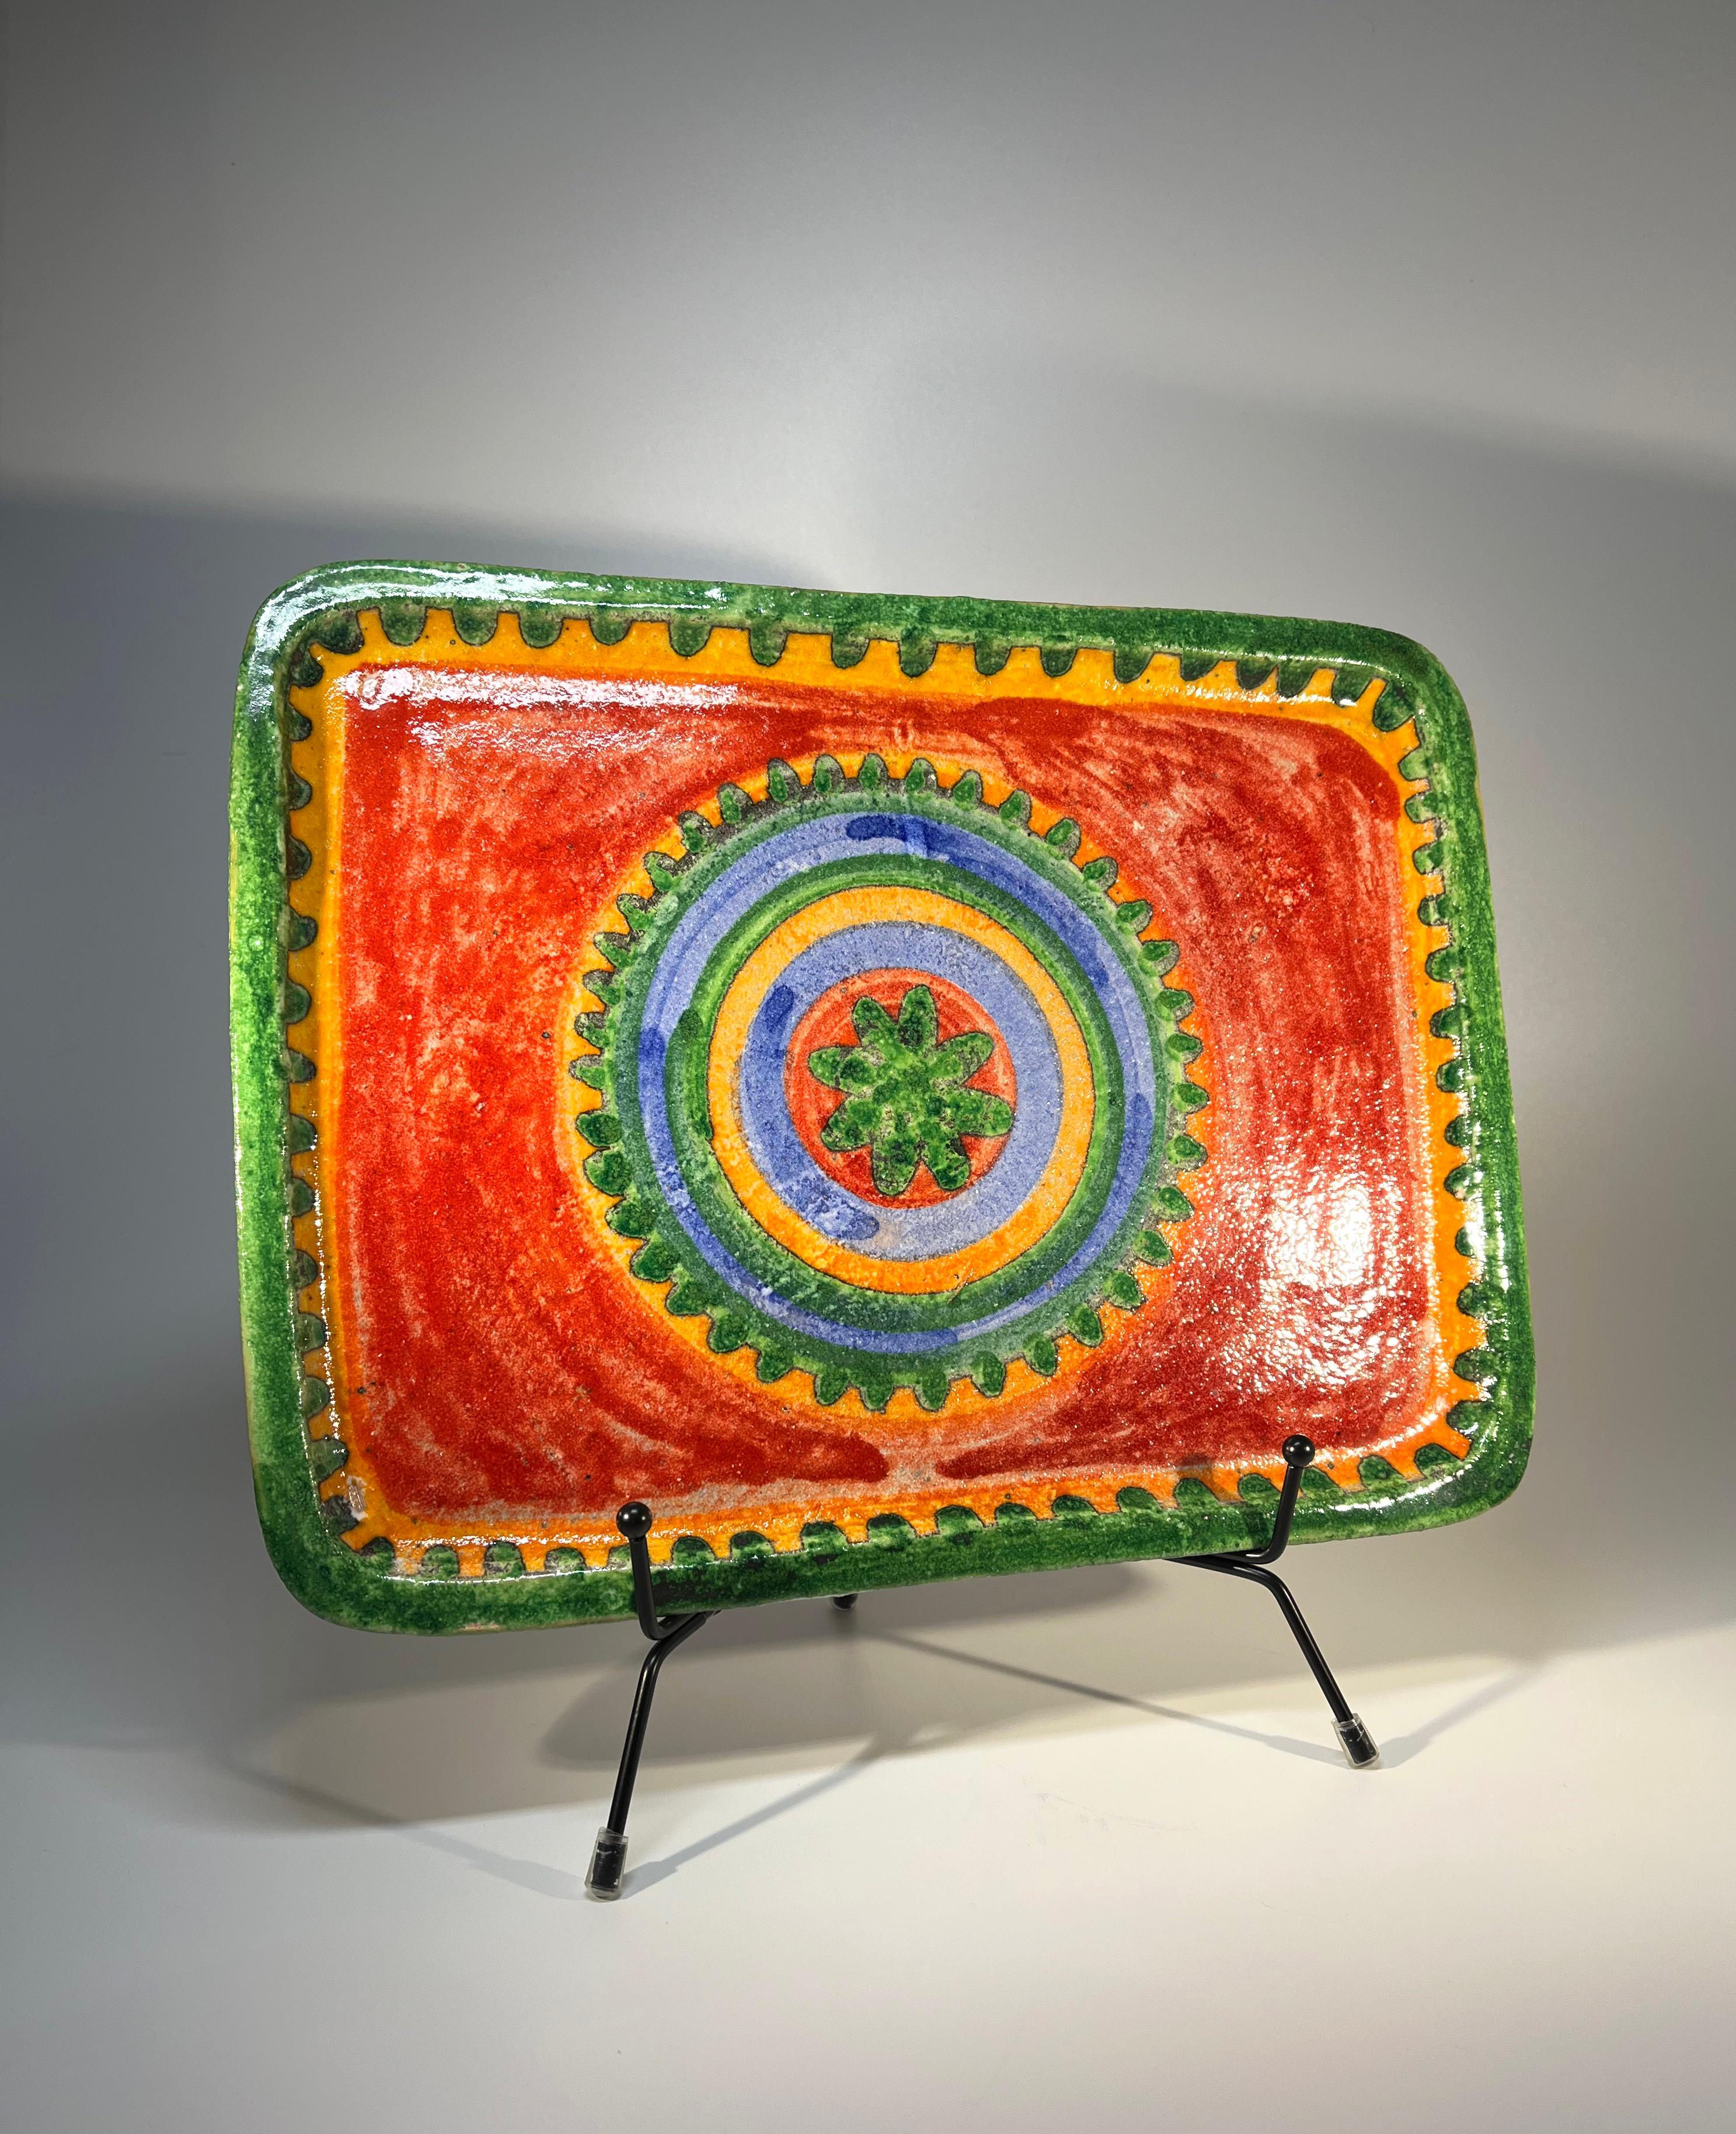 Mid-Century Modern Colours Of The Mediterranean, Glazed Ceramic Platter By DeSimone, Italy, c1960 For Sale